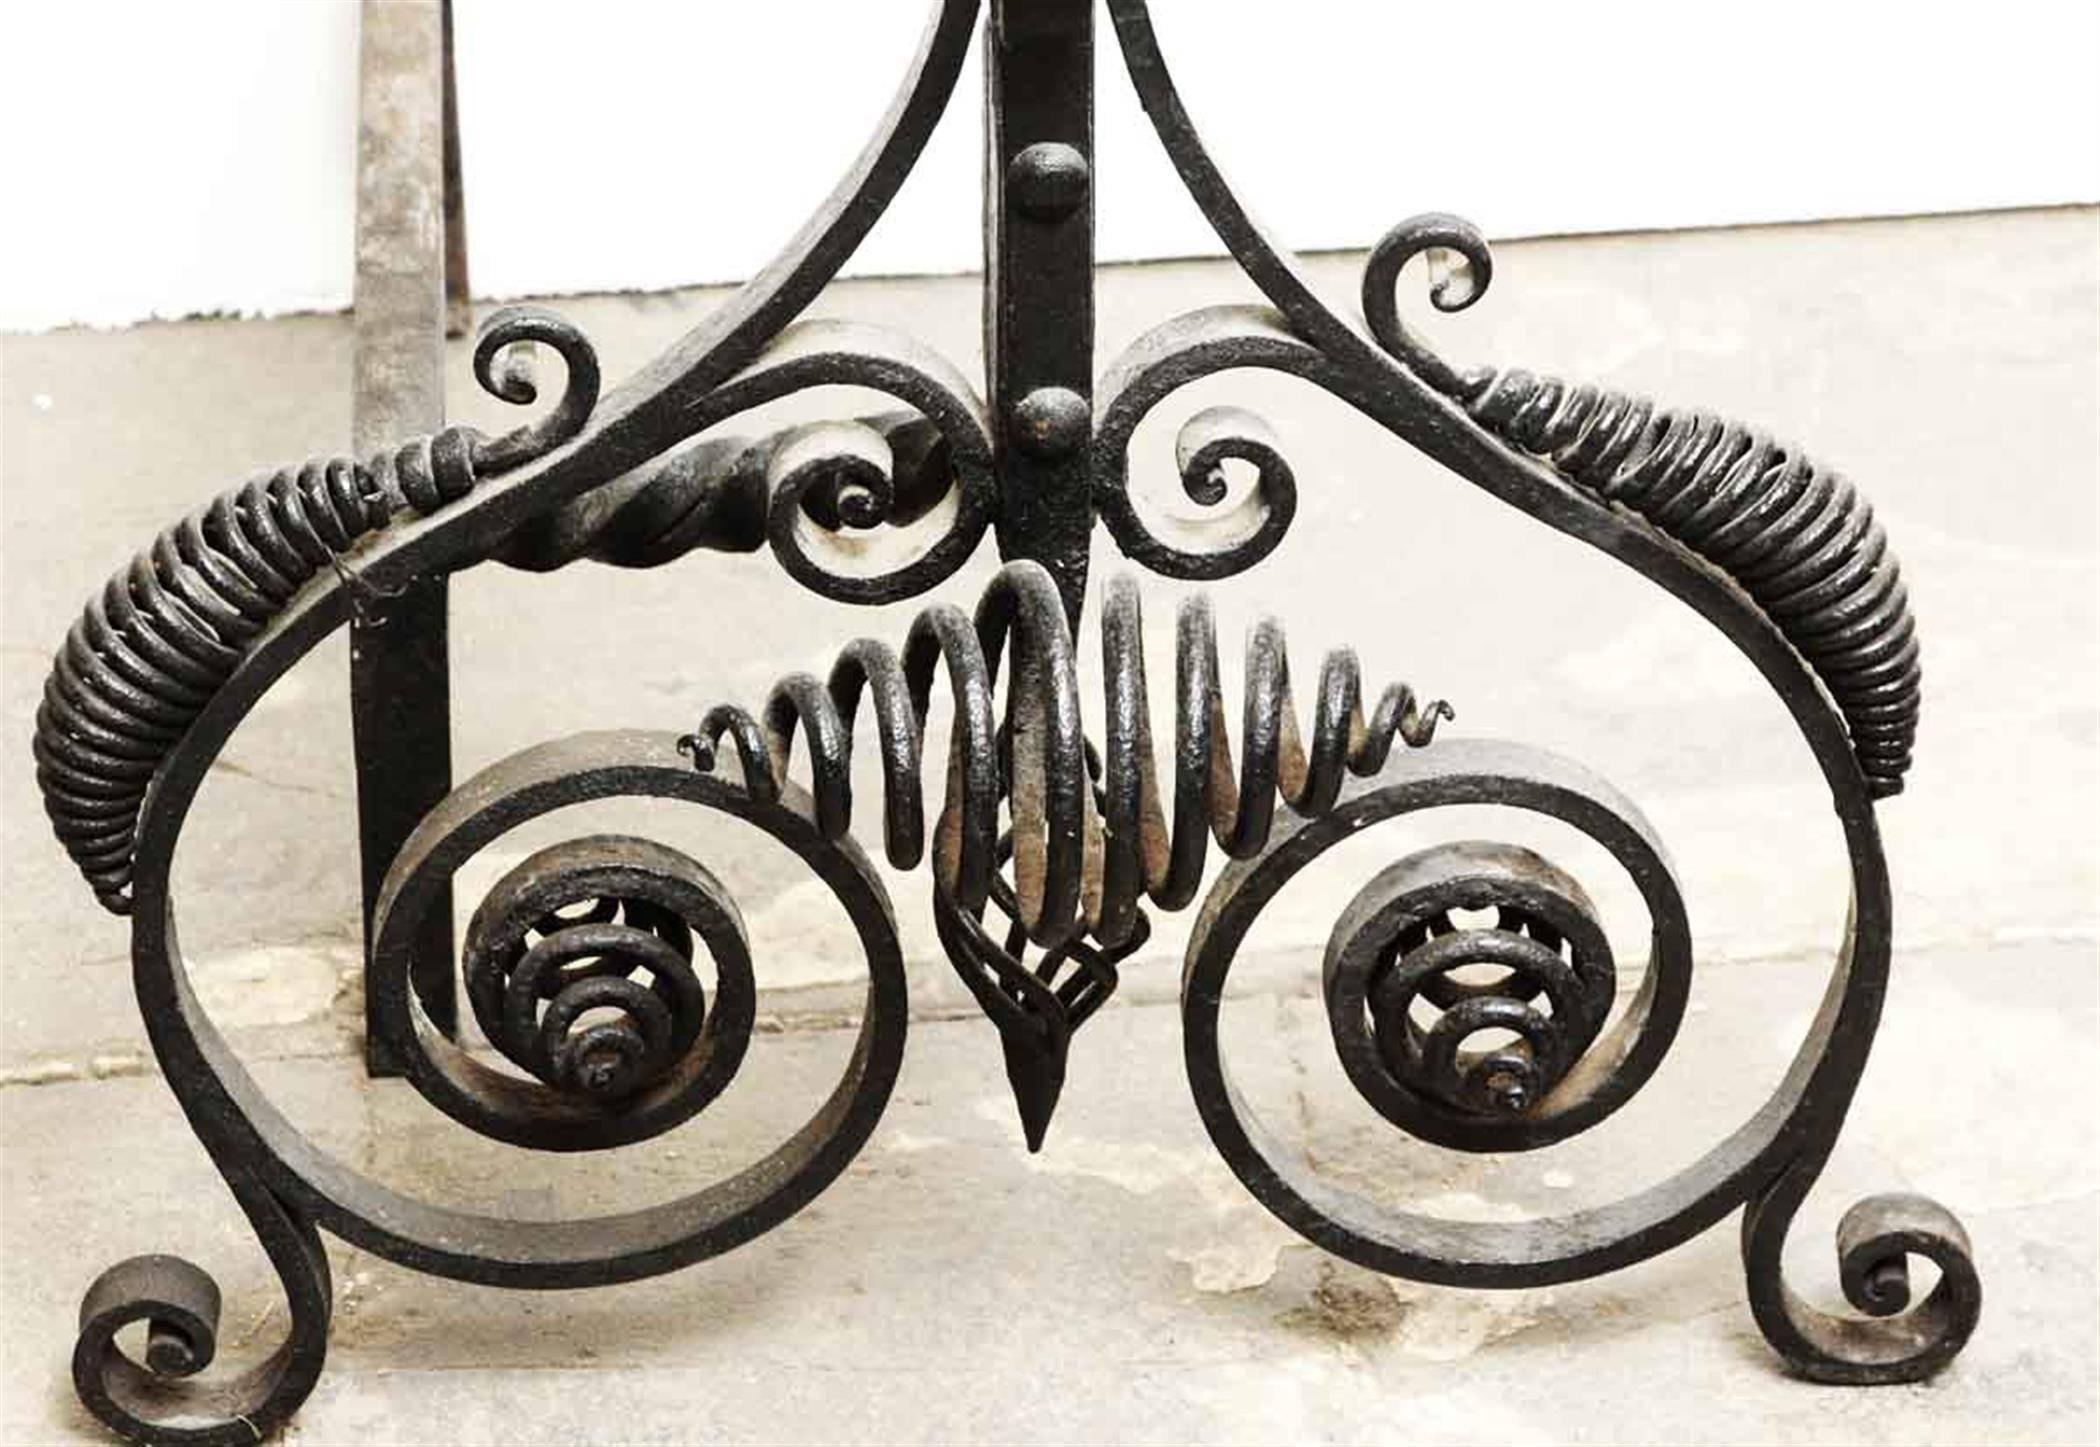 Late 19th Century 1880s Pair of Unique Large Blacksmith Hand-Wrought Iron Fireplace Andirons